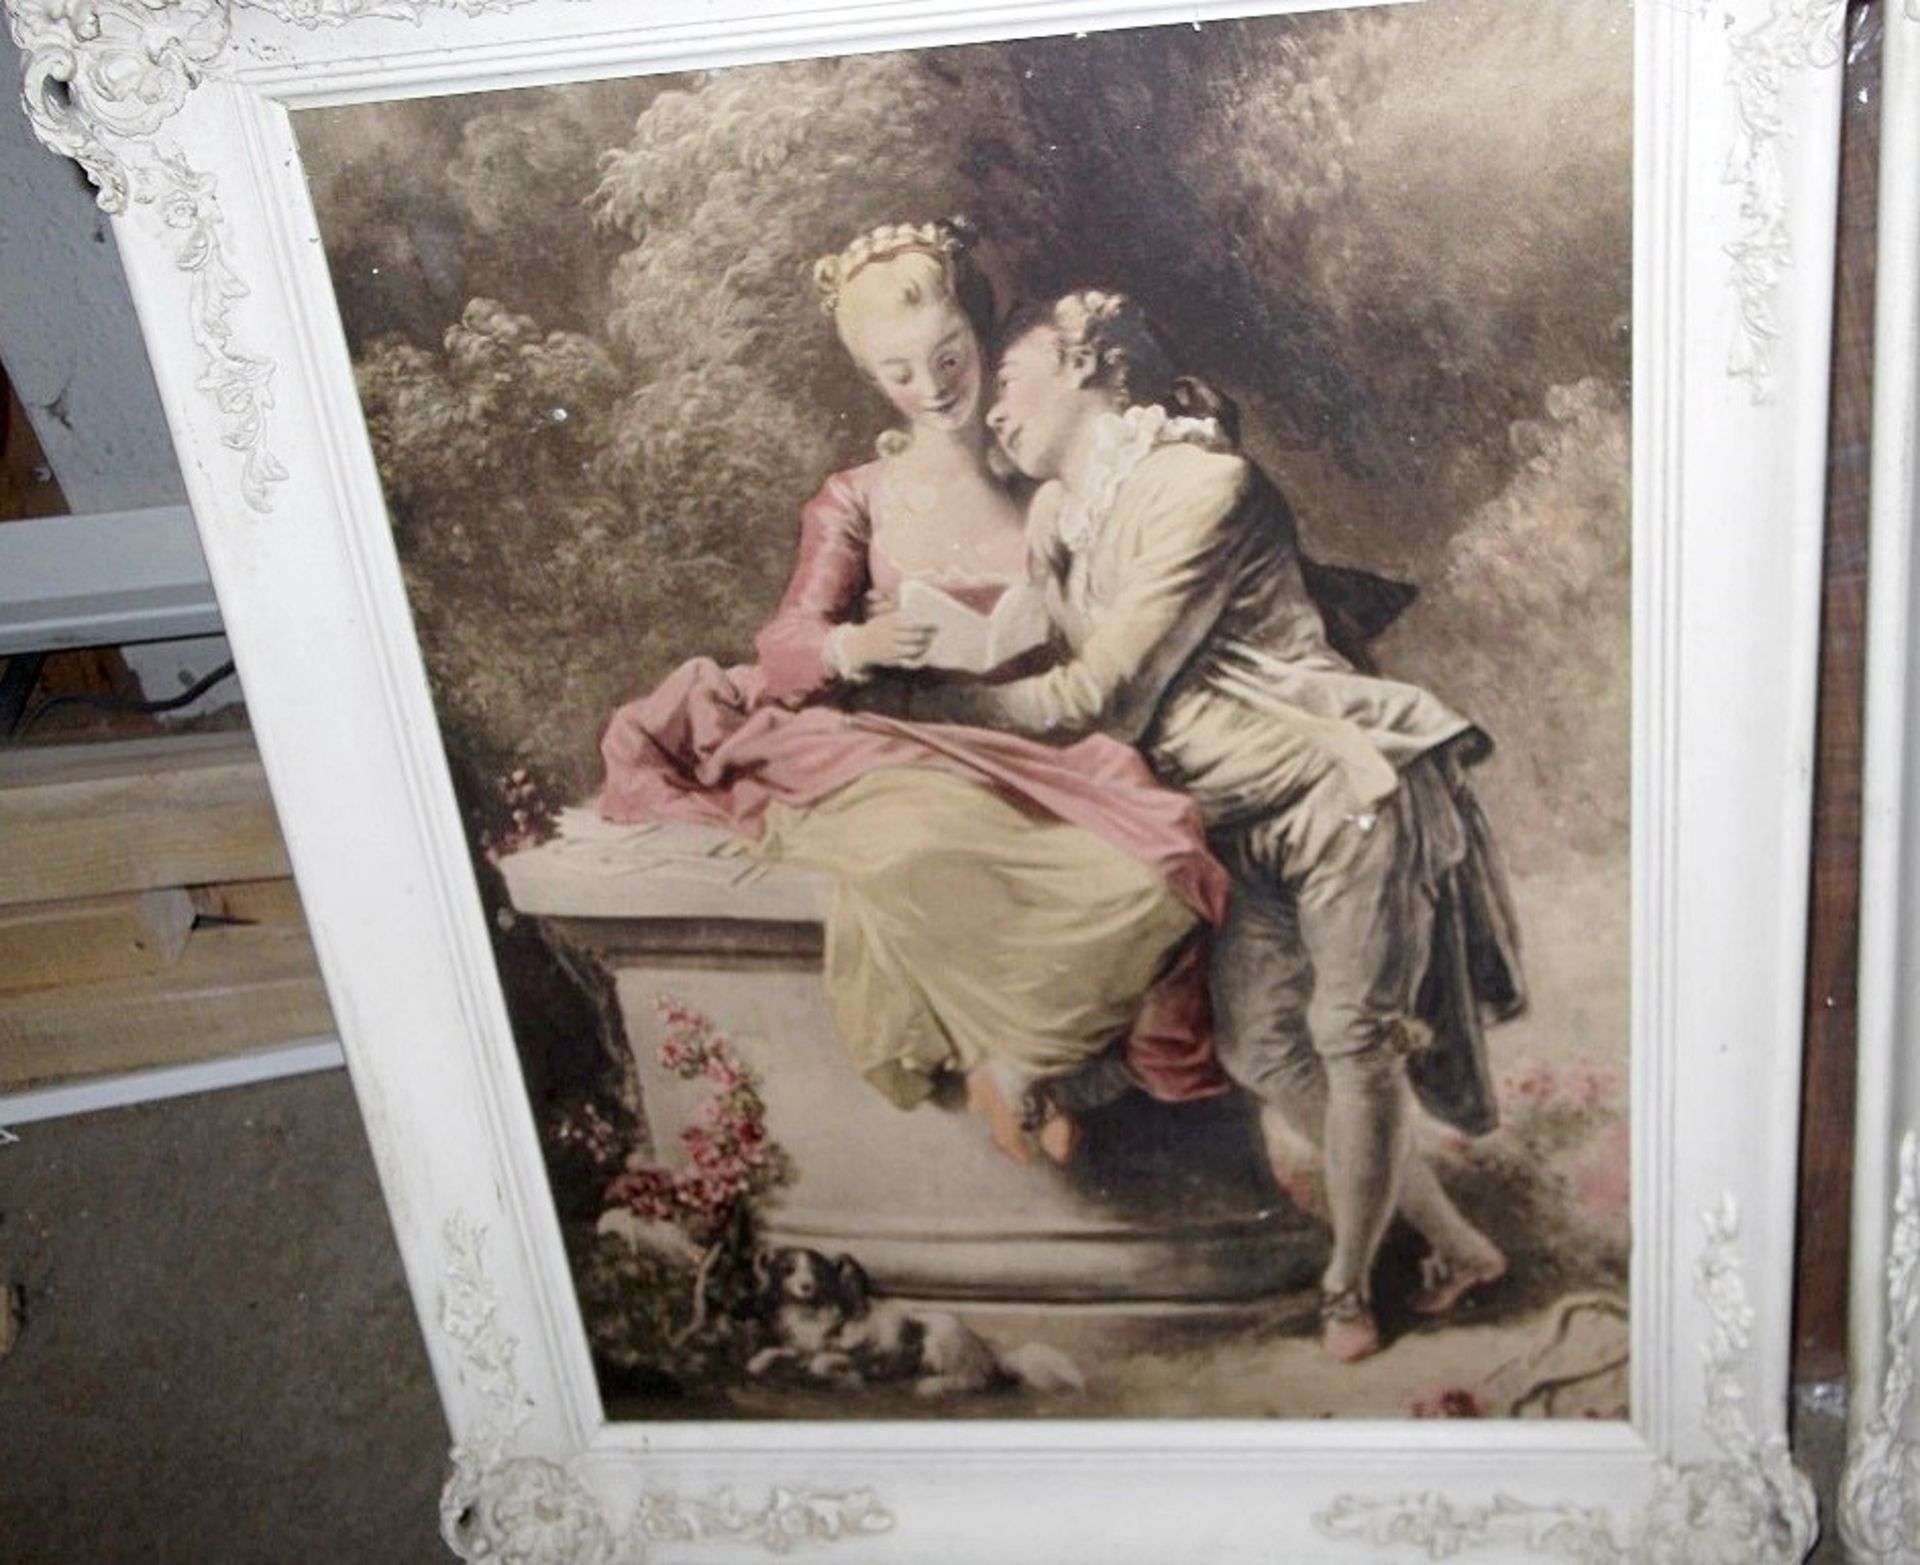 A Pair Of Framed Baroque Art Prints By B&S Creations, New York - Both Very Rare & Charming - Image 5 of 7